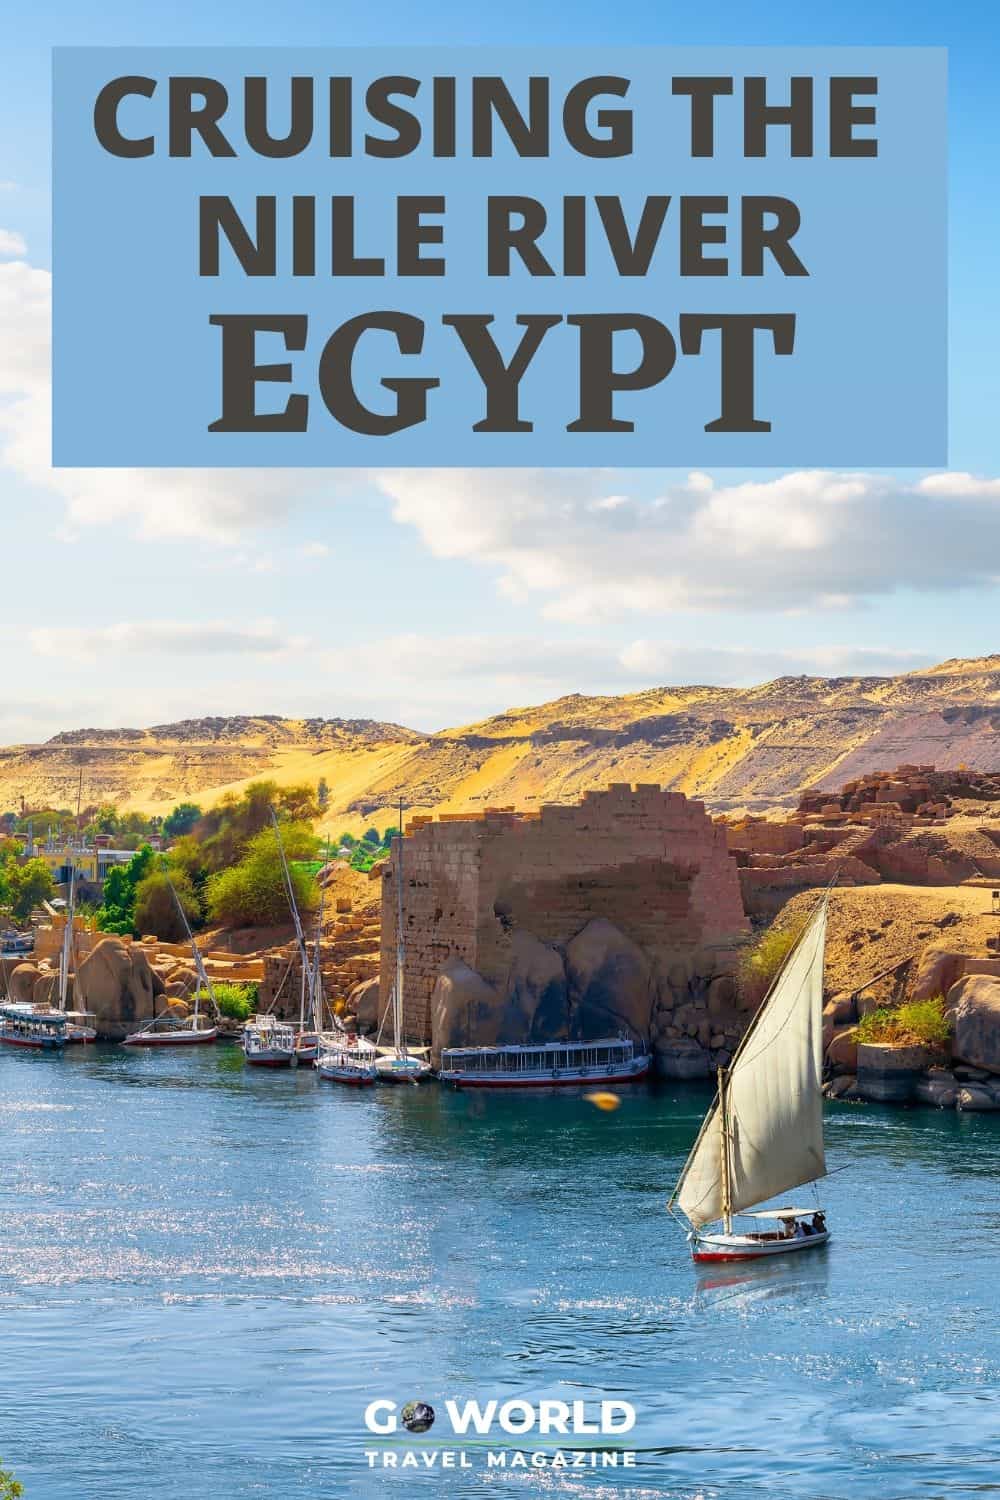 A Nile cruise is a great way to see many of Egypt's tops sights and attractions like those in Luxor and Aswan easily and comfortably. #Nileriveregypt #whattoseeinegypt #nilerivercruise